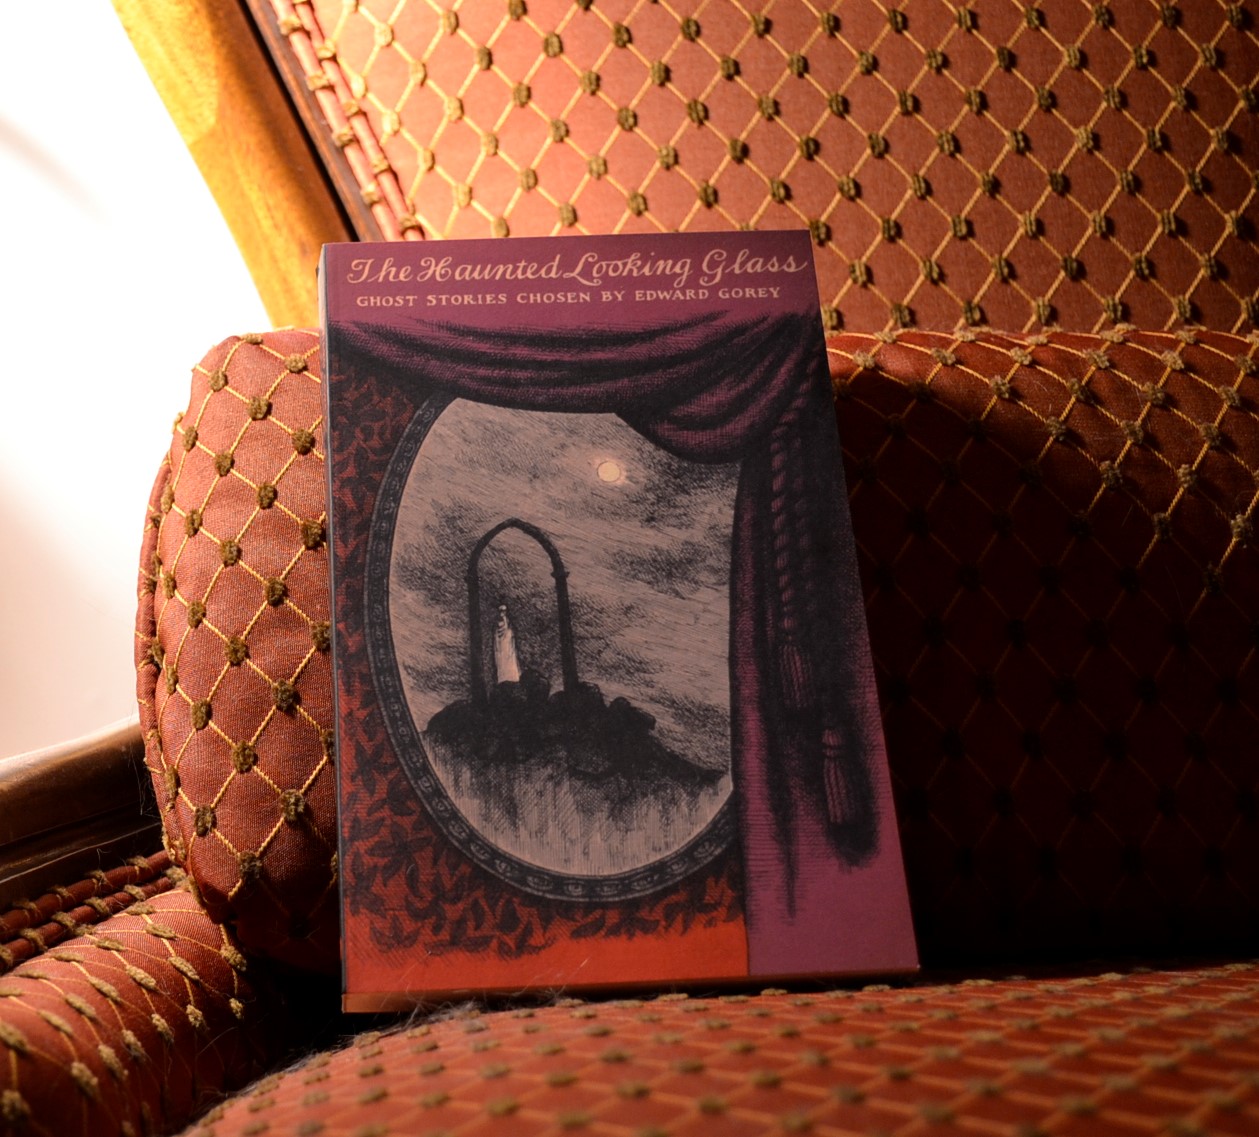 The cover of The Haunted Looking Glass shows a mirror behind a curtain reflecting a doorway on a hill.